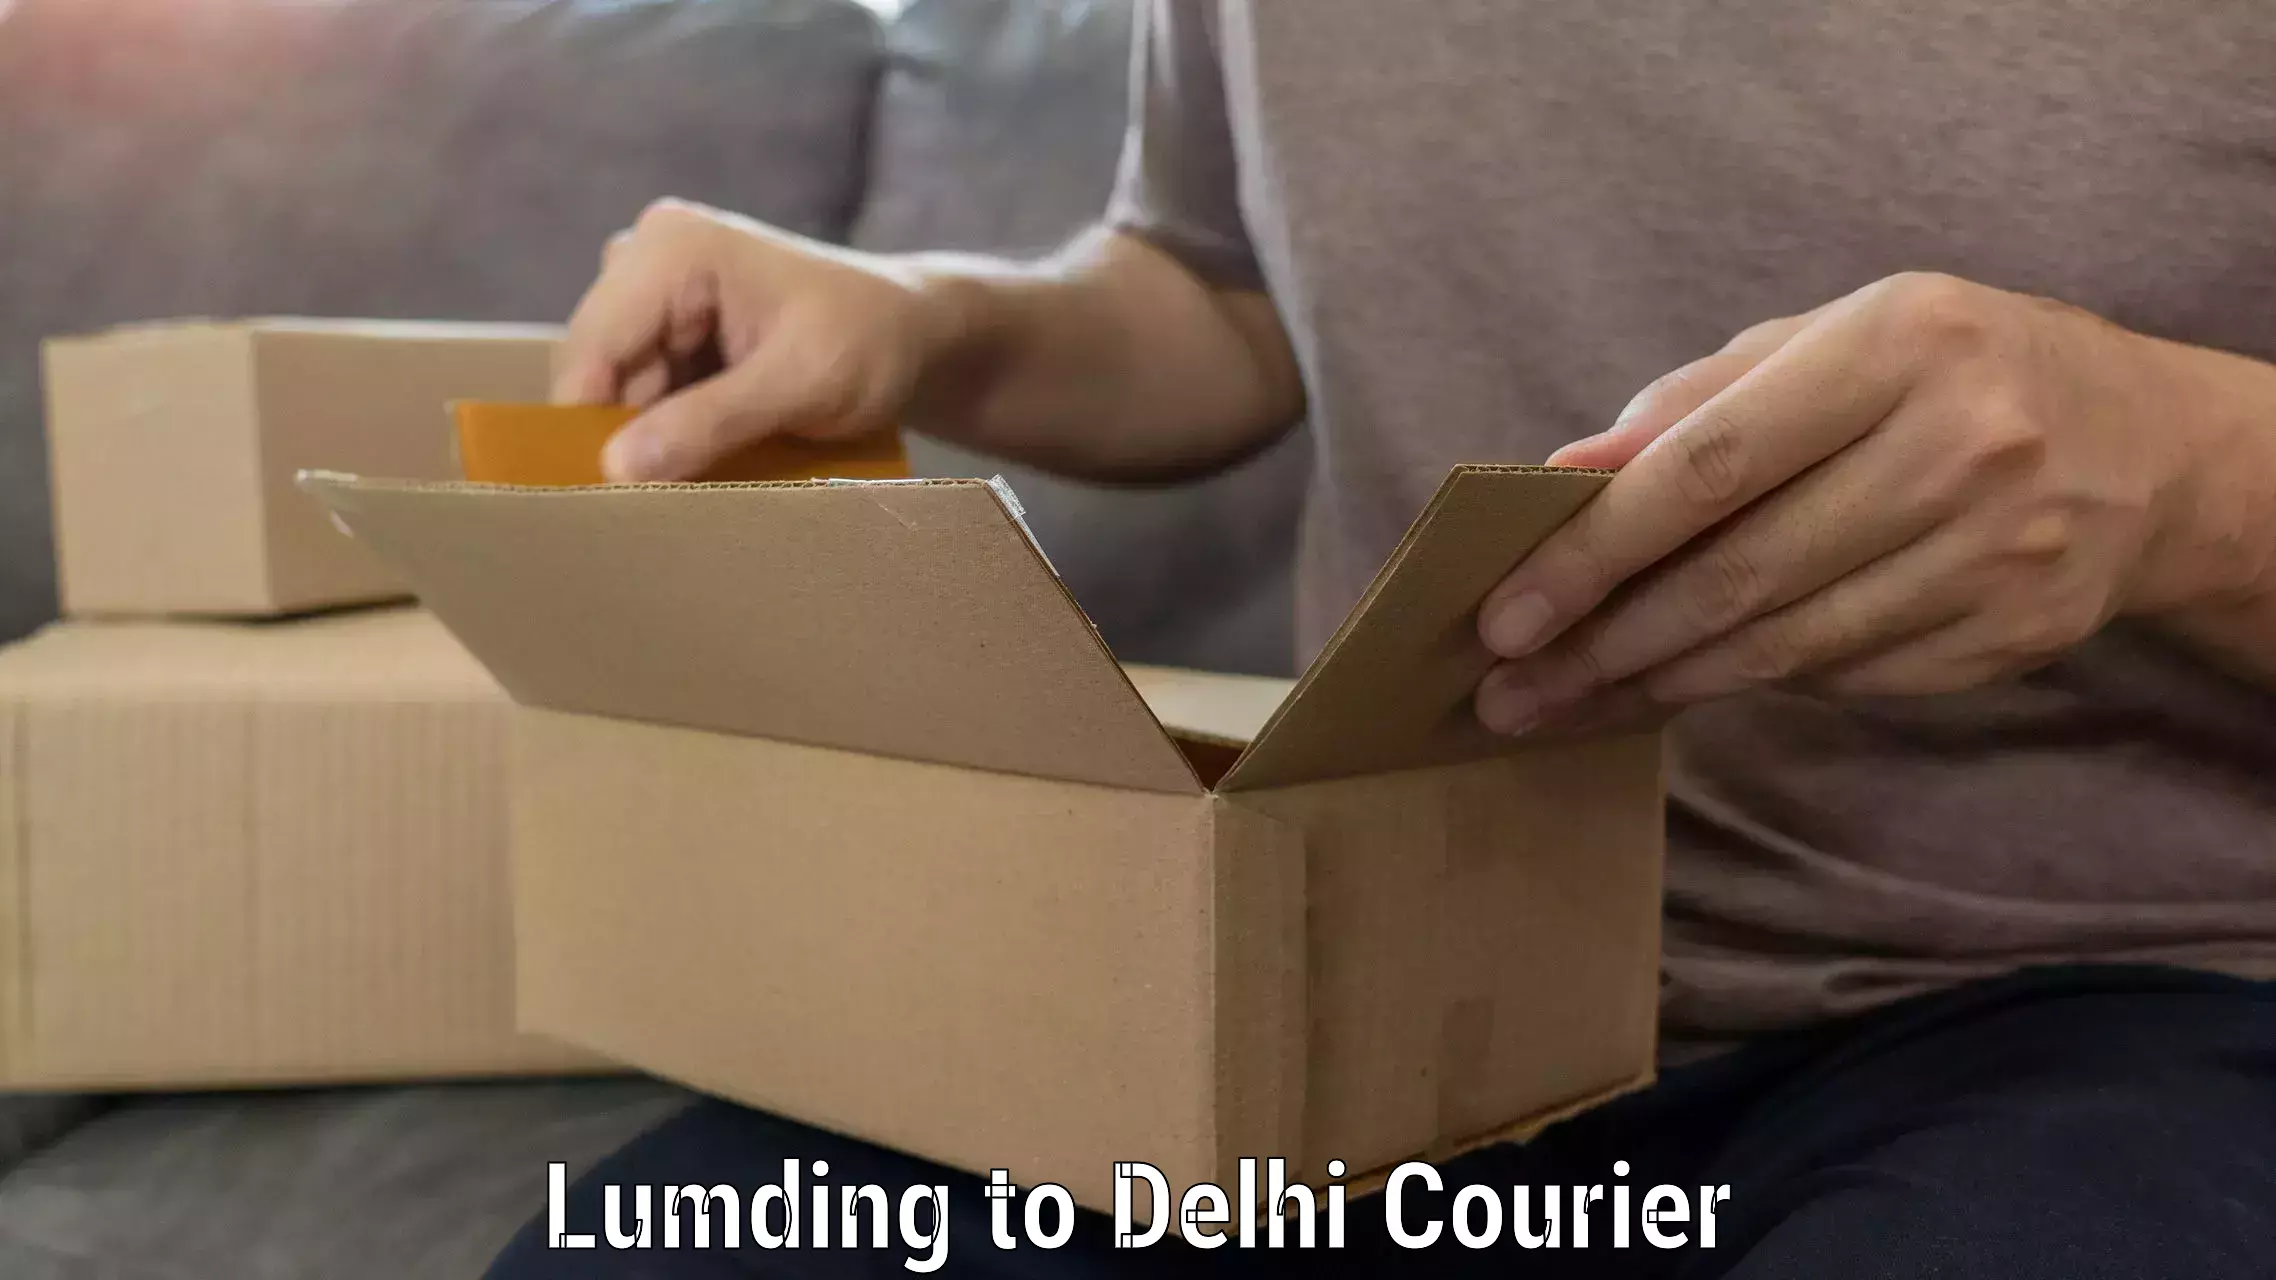 Quality relocation assistance Lumding to Lodhi Road